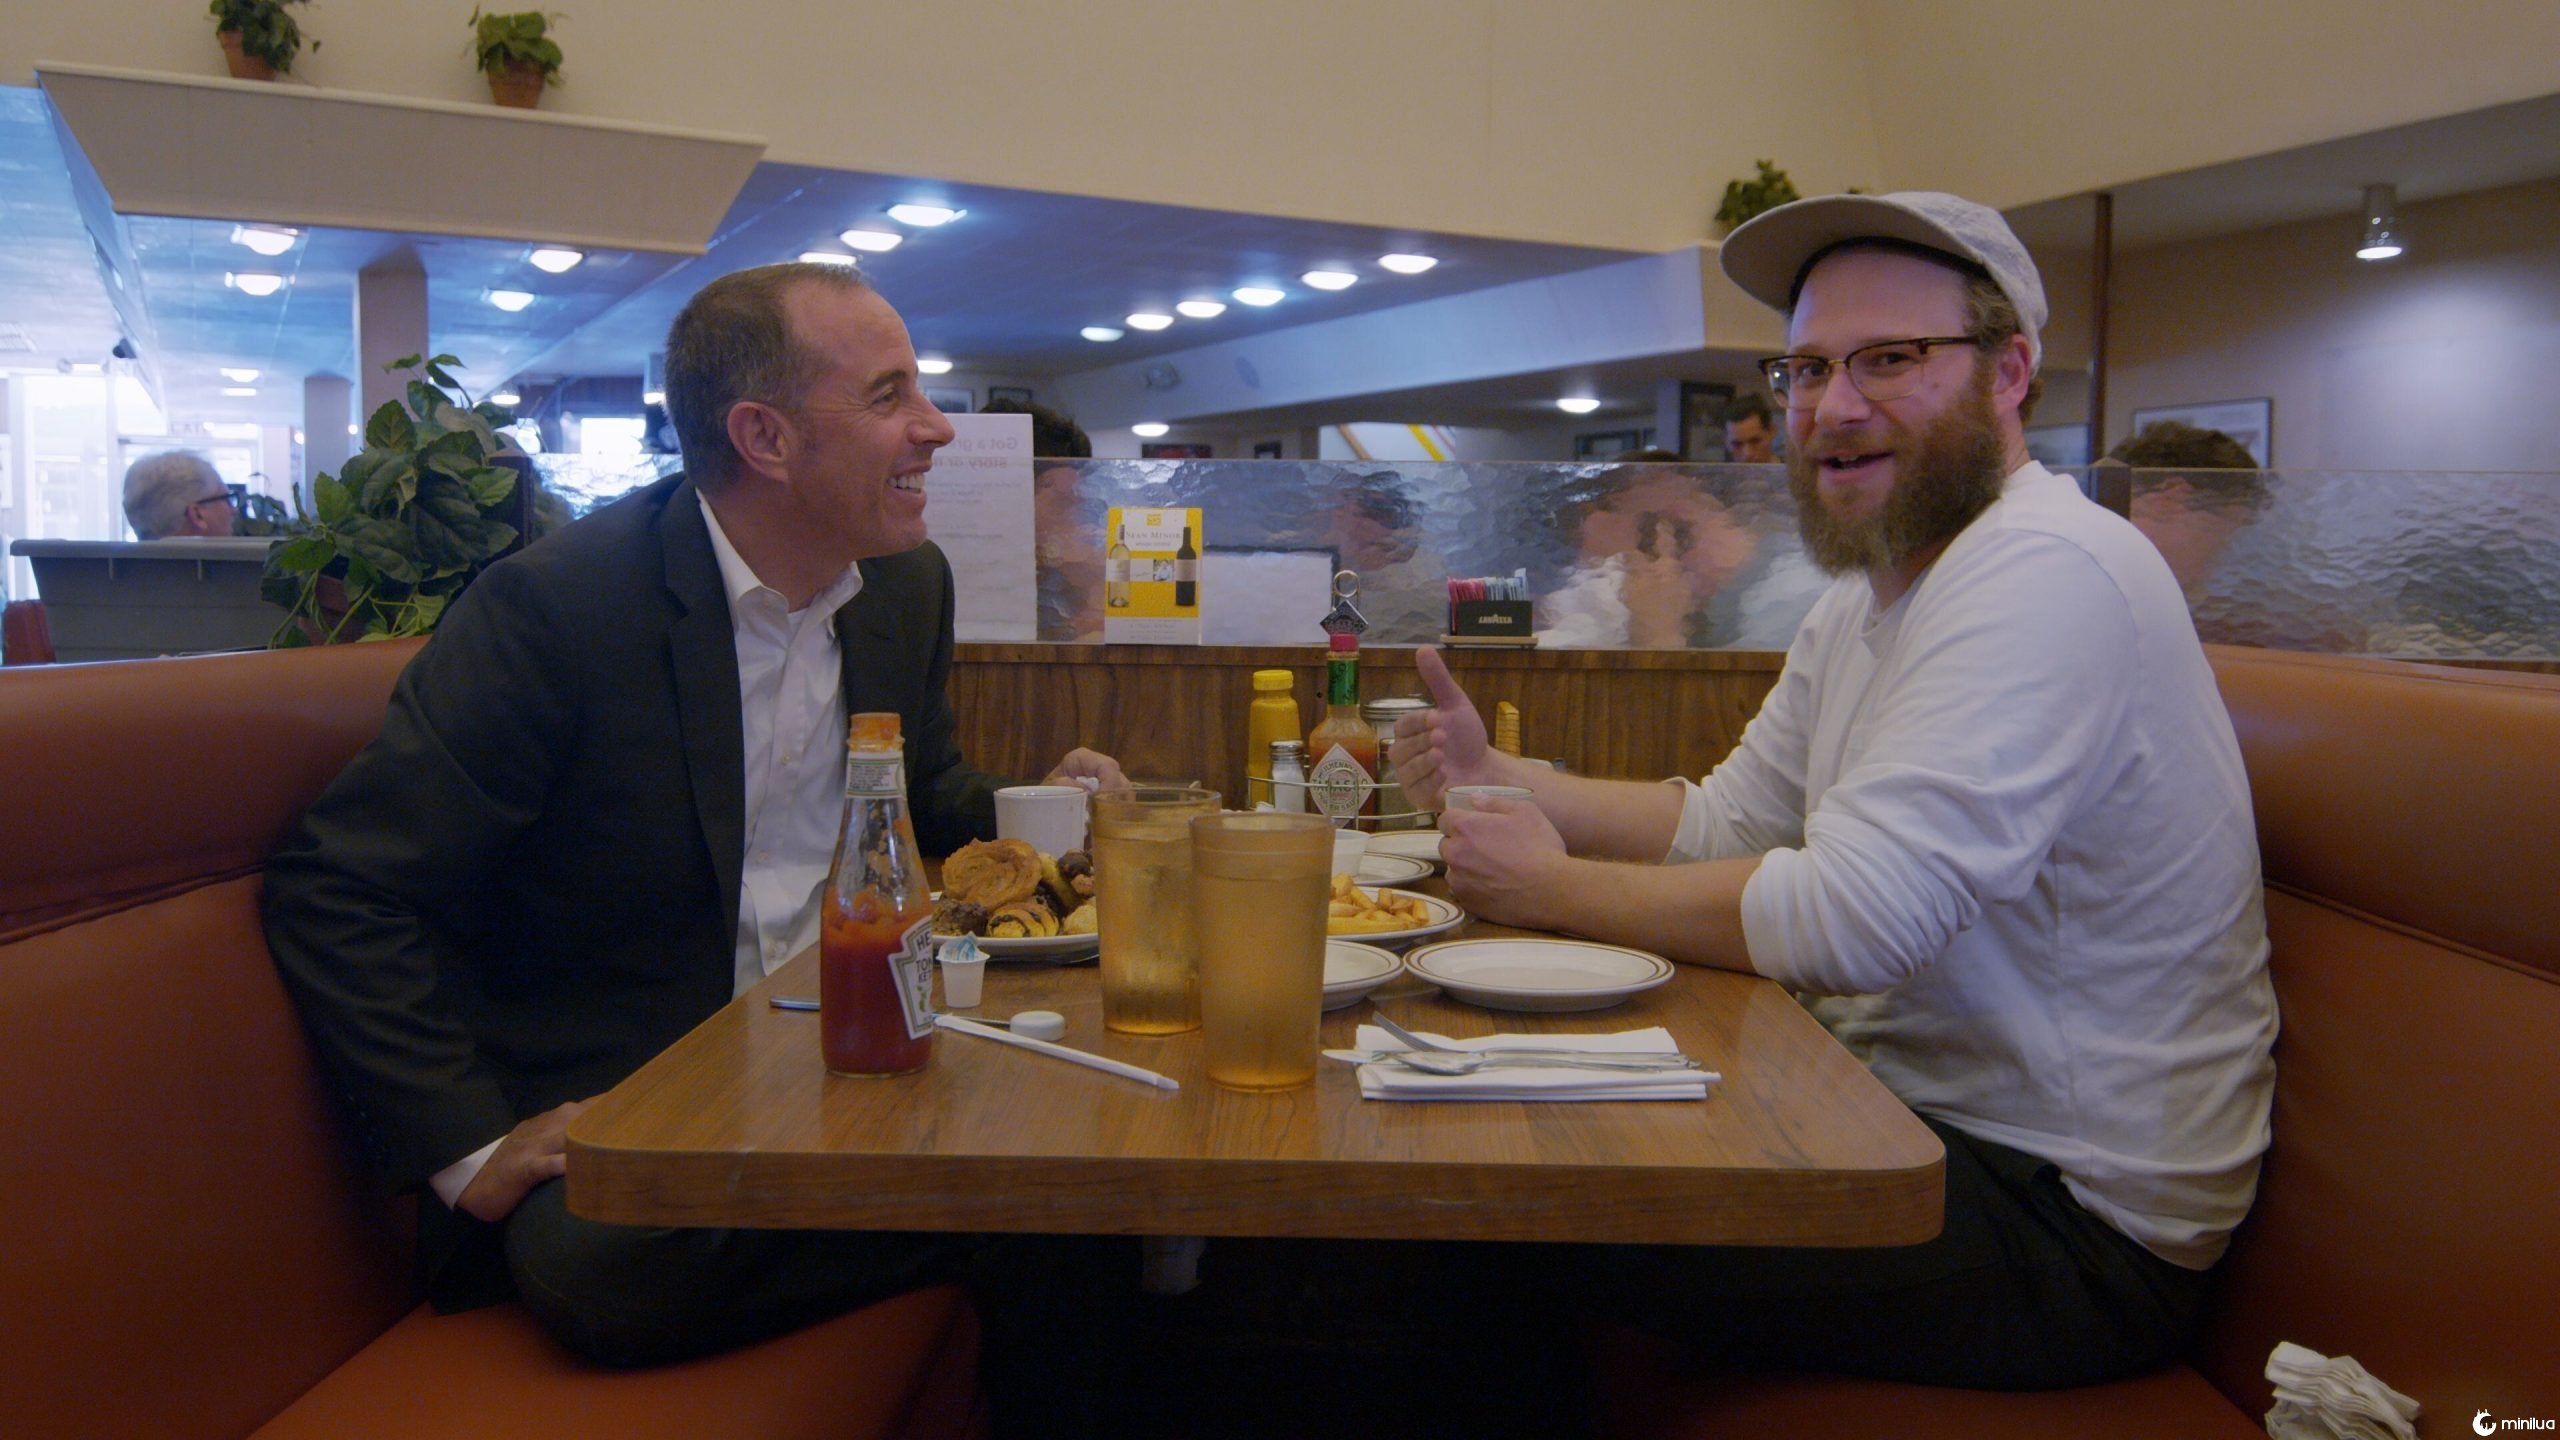 Jerry Seinfeld and Seth Rogen in "Comedians in Cars Getting Coffee."